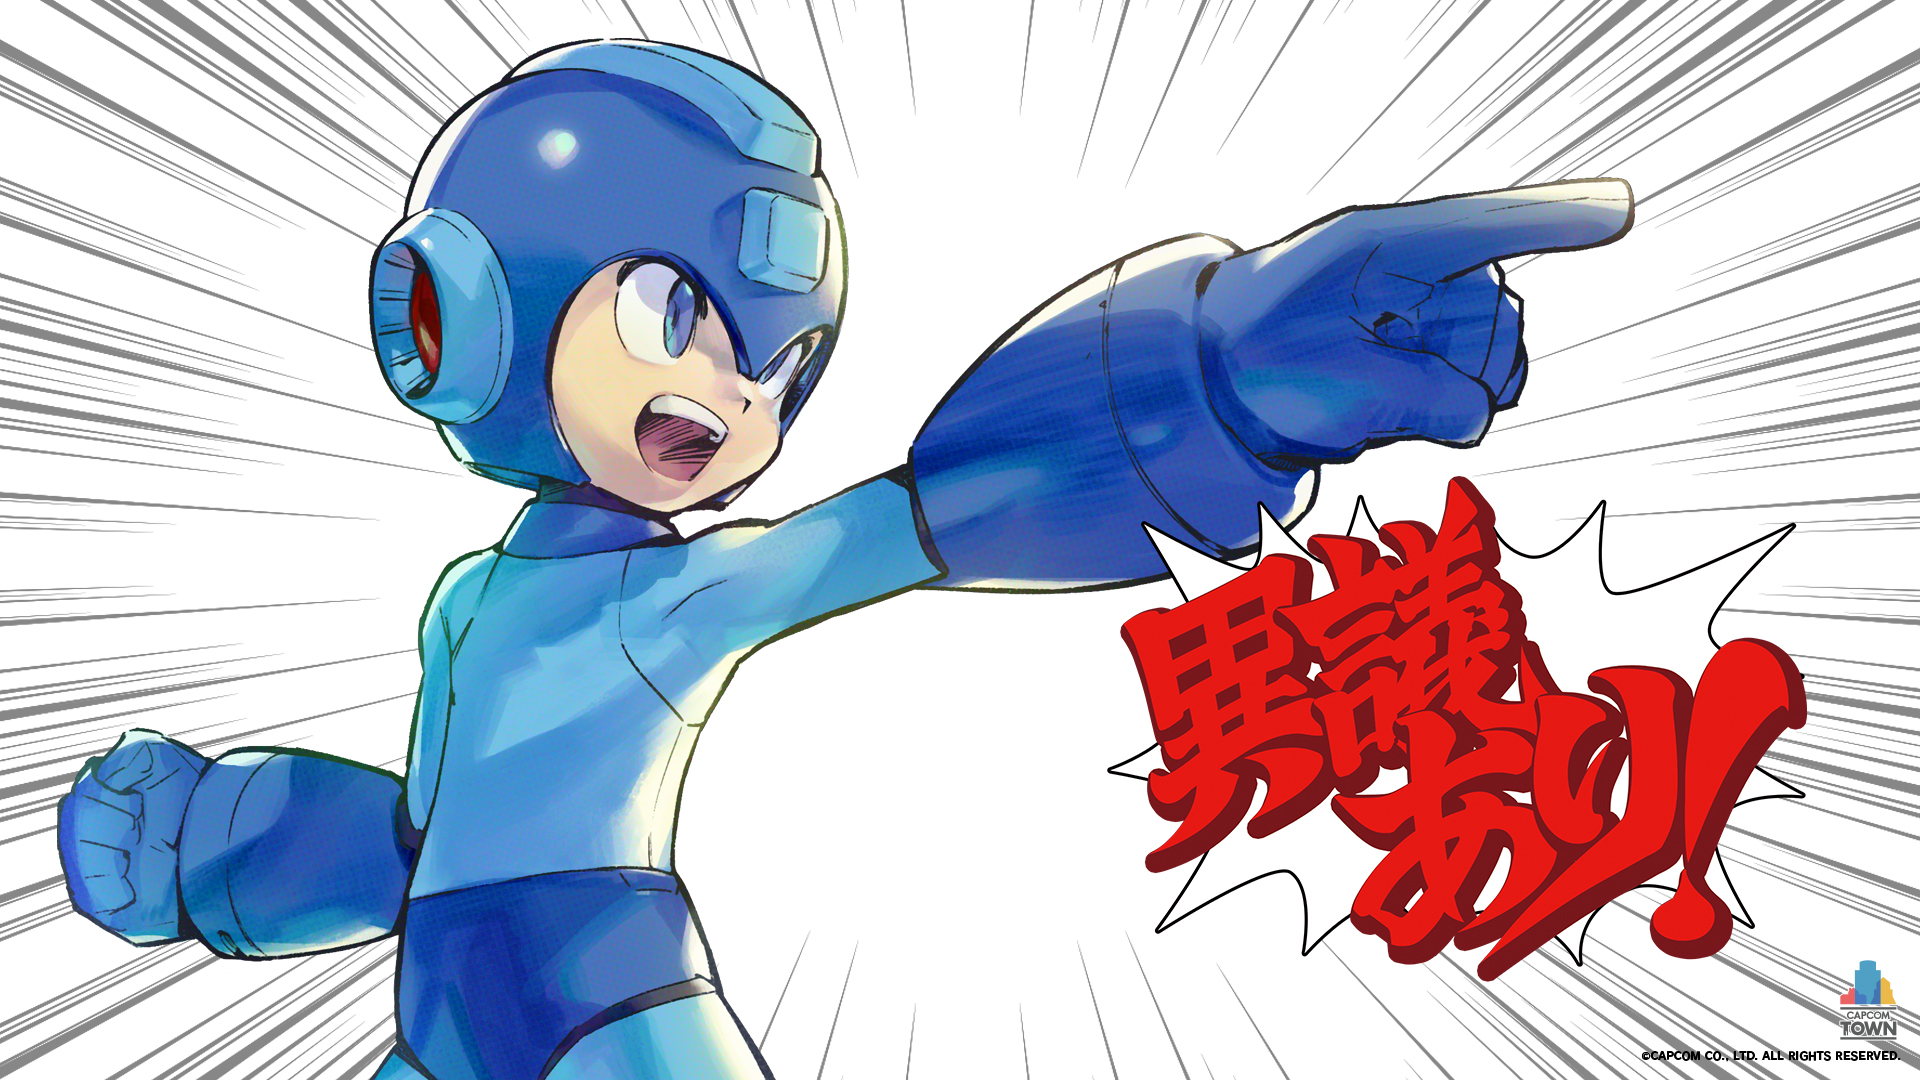 Capcom Shares Wallpapers of Non-Ace Attorney Characters Shouting “Objection!”